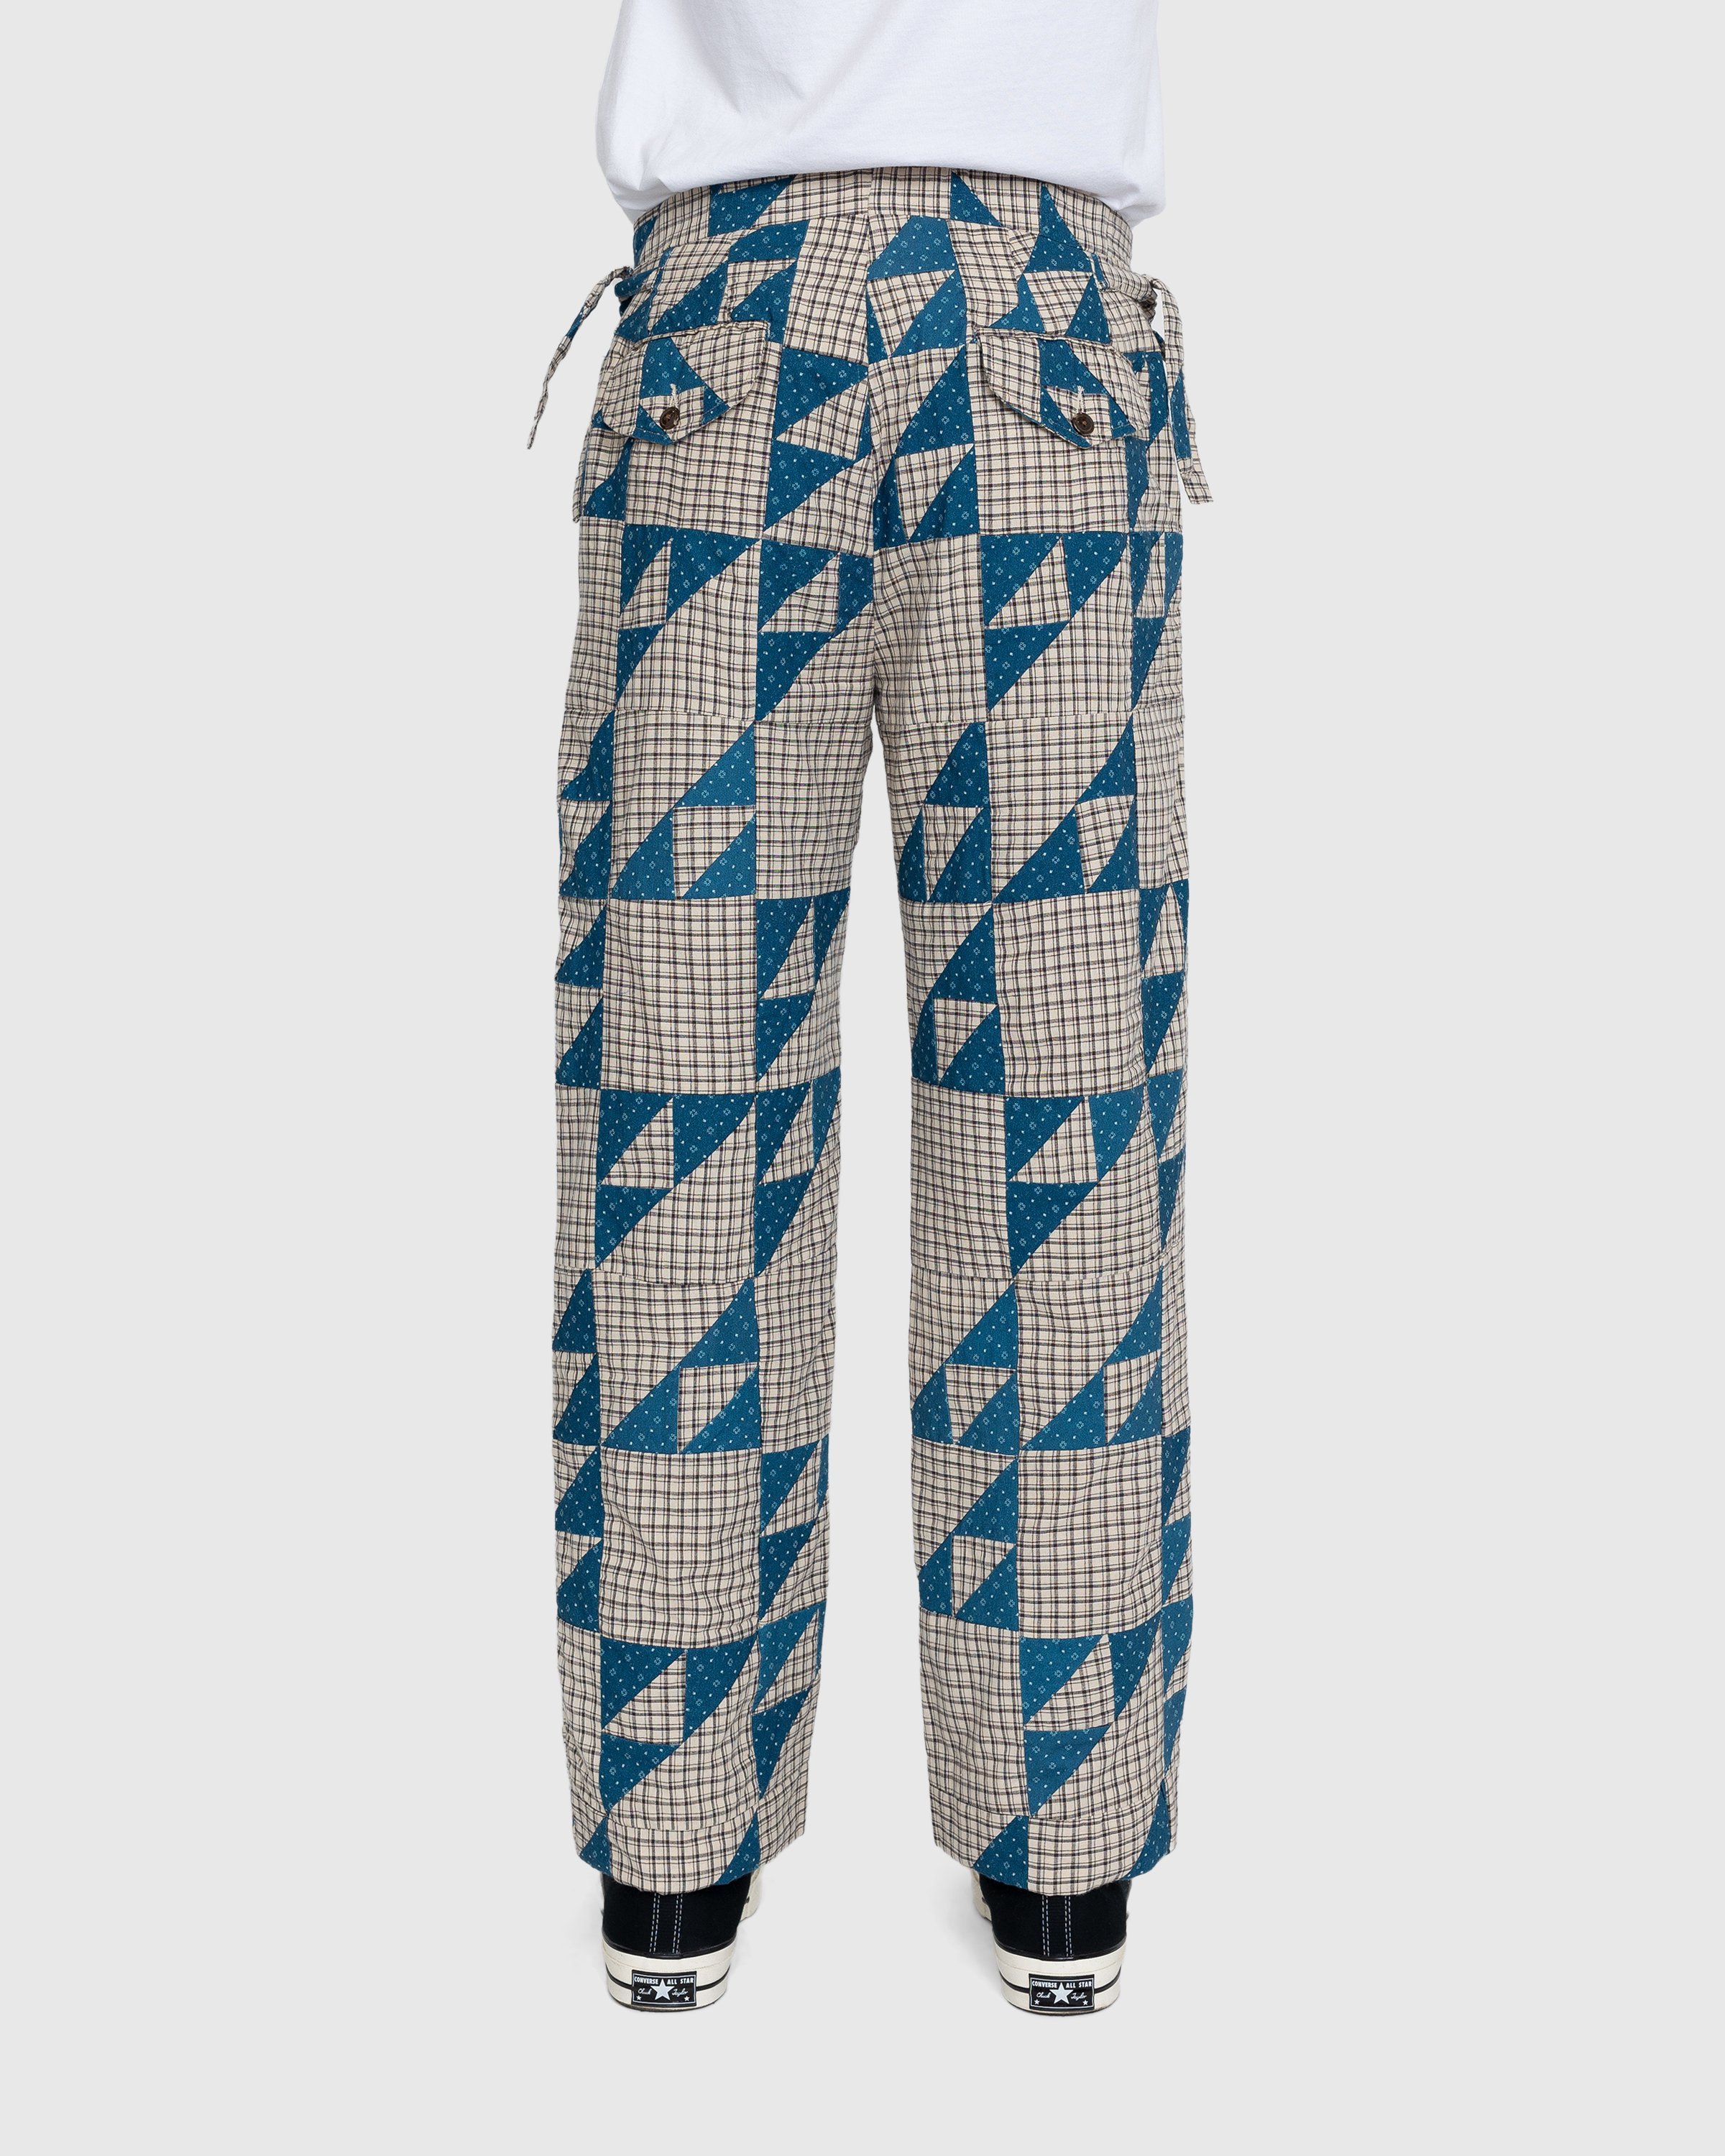 Bode - Wandering Lover Trousers Multi - Clothing - Multi - Image 2